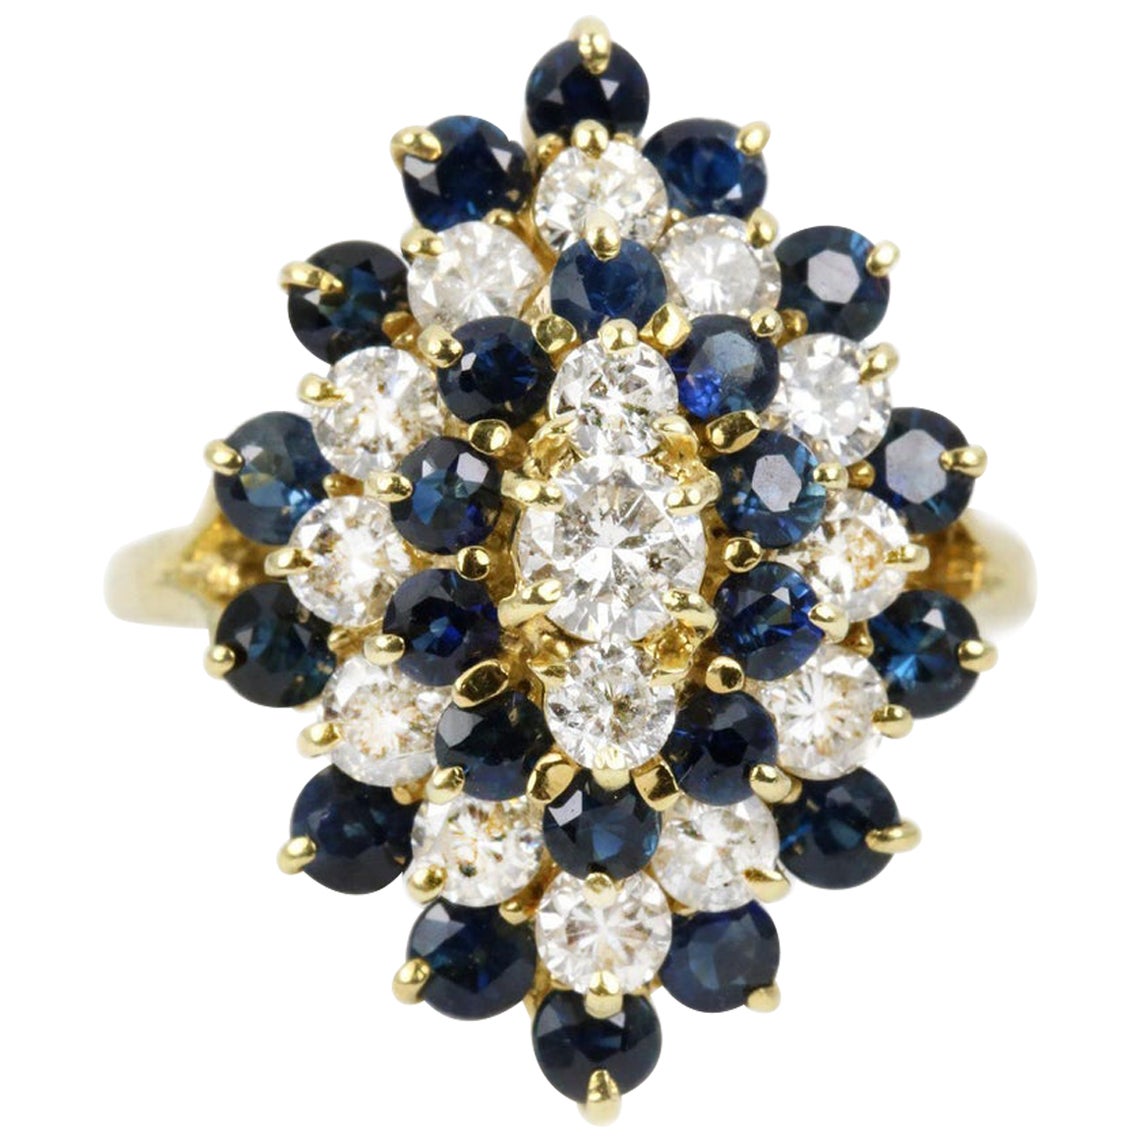 3,0 tcw Royal Sapphire & Diamant Cocktail Cluster Ring